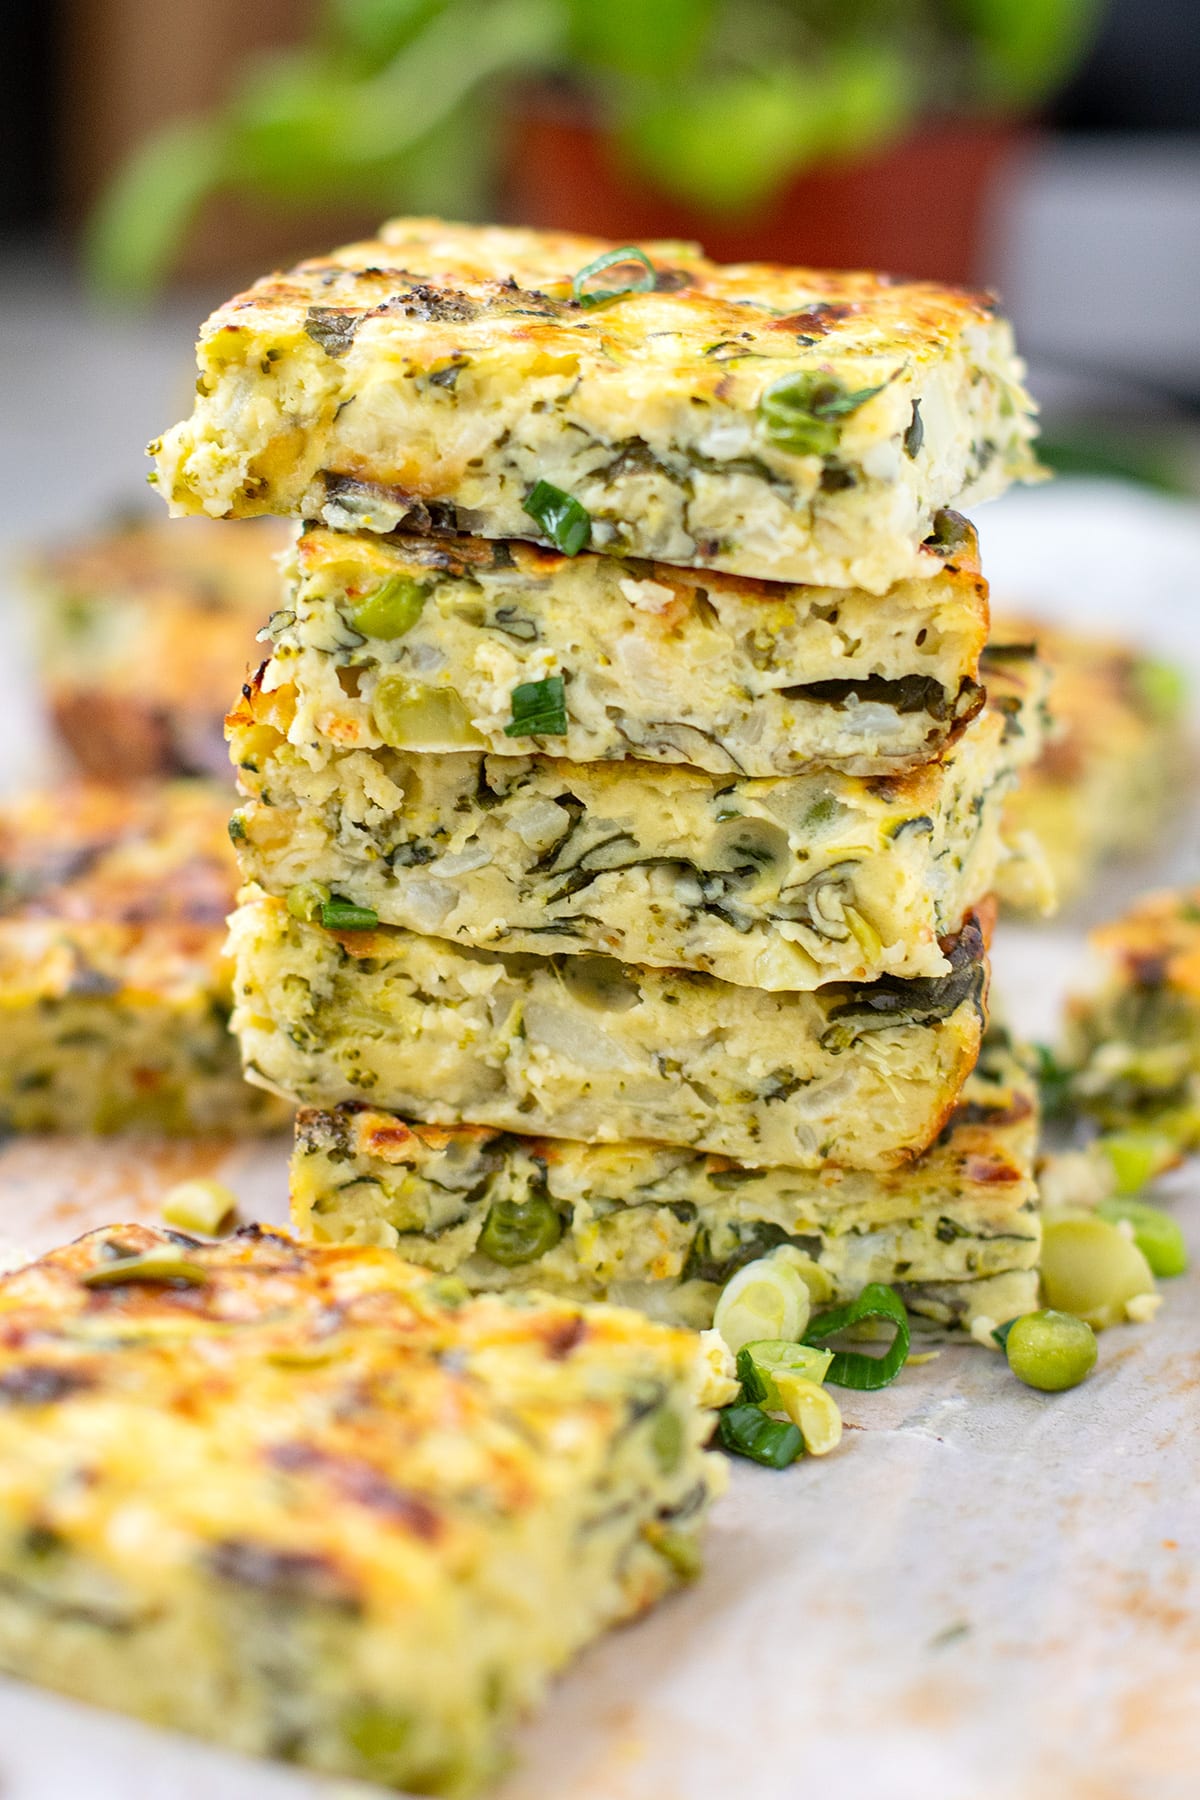 Healthy Zucchini Slice With Cottage Cheese Broccoli and Spinach